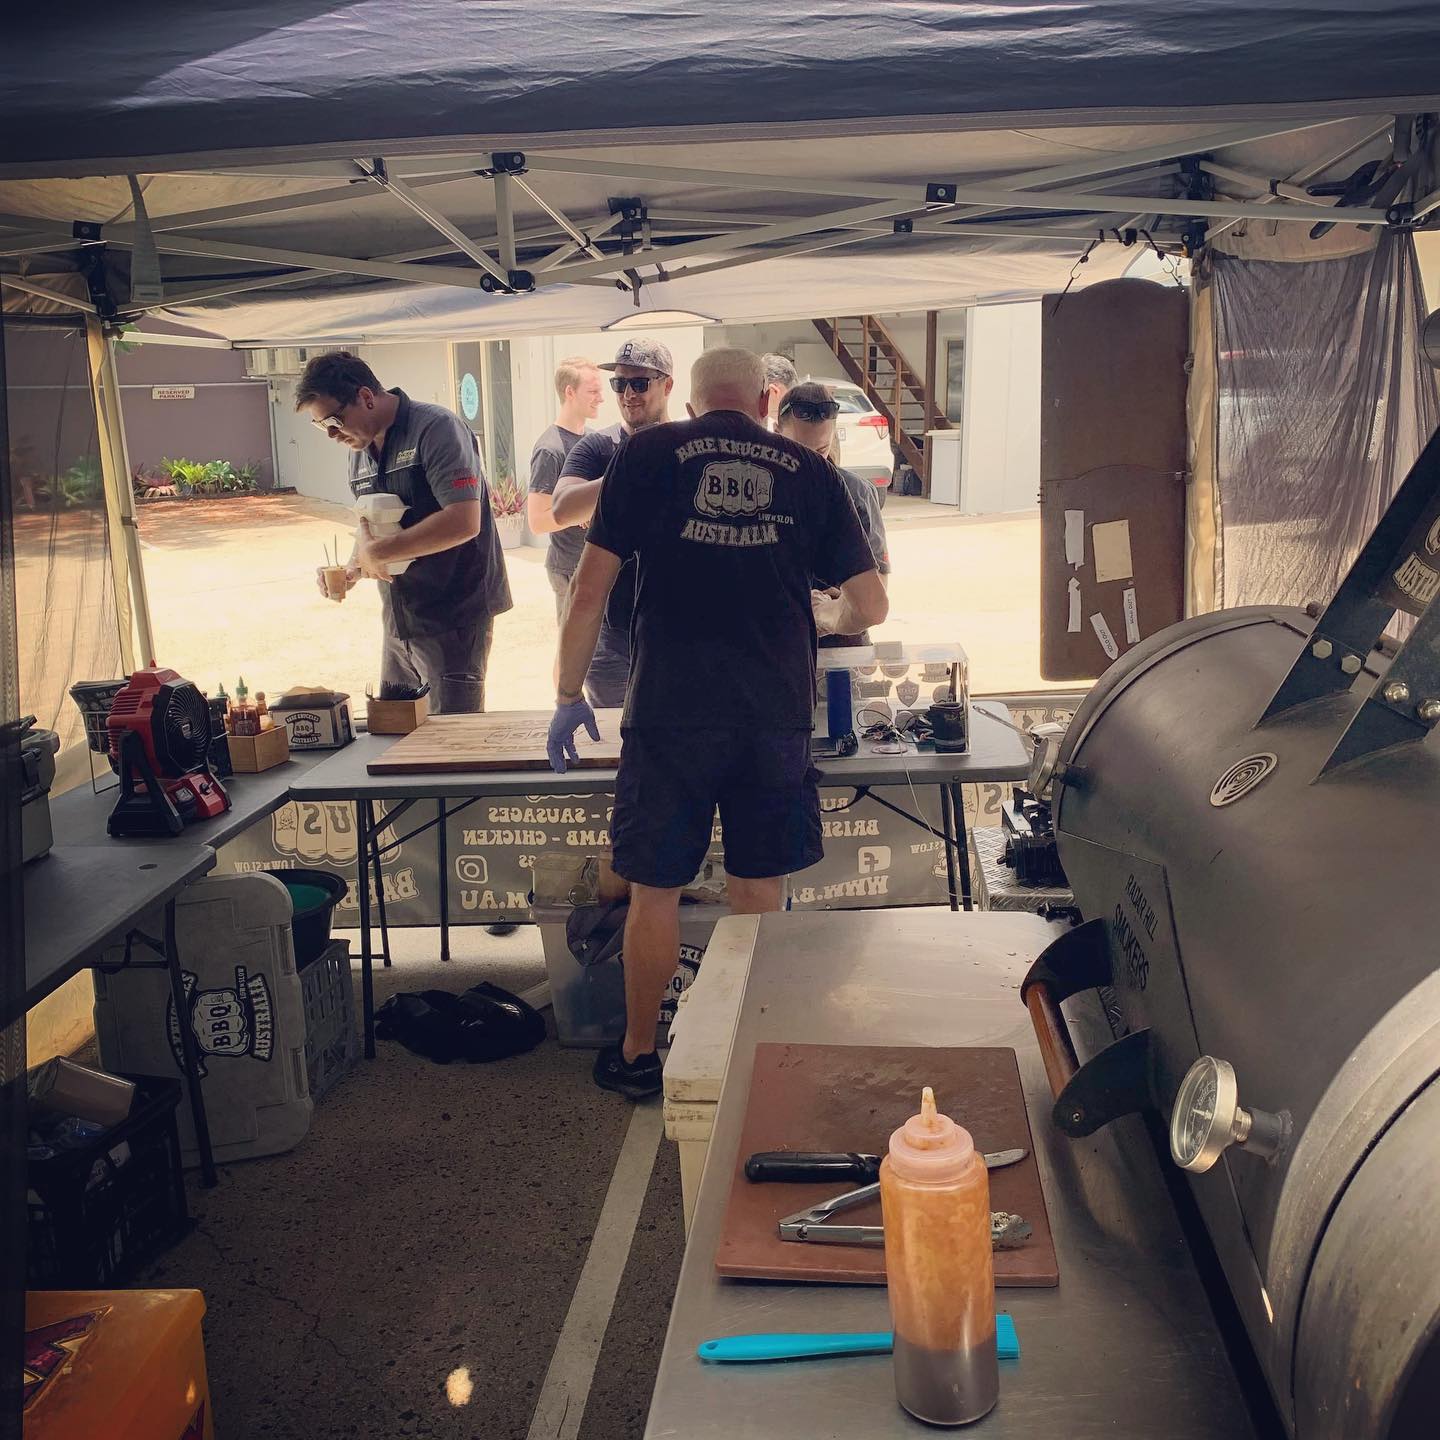 Big Love to @rustysfoodbbq for capturing me at work today @sunshinecoastbrewery 🏻 -#getsome #lownslow #lownslowbbq #barbeque #barbecue #itsgoodbbq #brisket #pork #lamb #chicken #brisbane #queensland #australia #sleepwhenimdead #allinnbrewingco #traditionalbbq #bareknucklesbbq #bareknucklesbarbeque #bareknucklesbarbecue